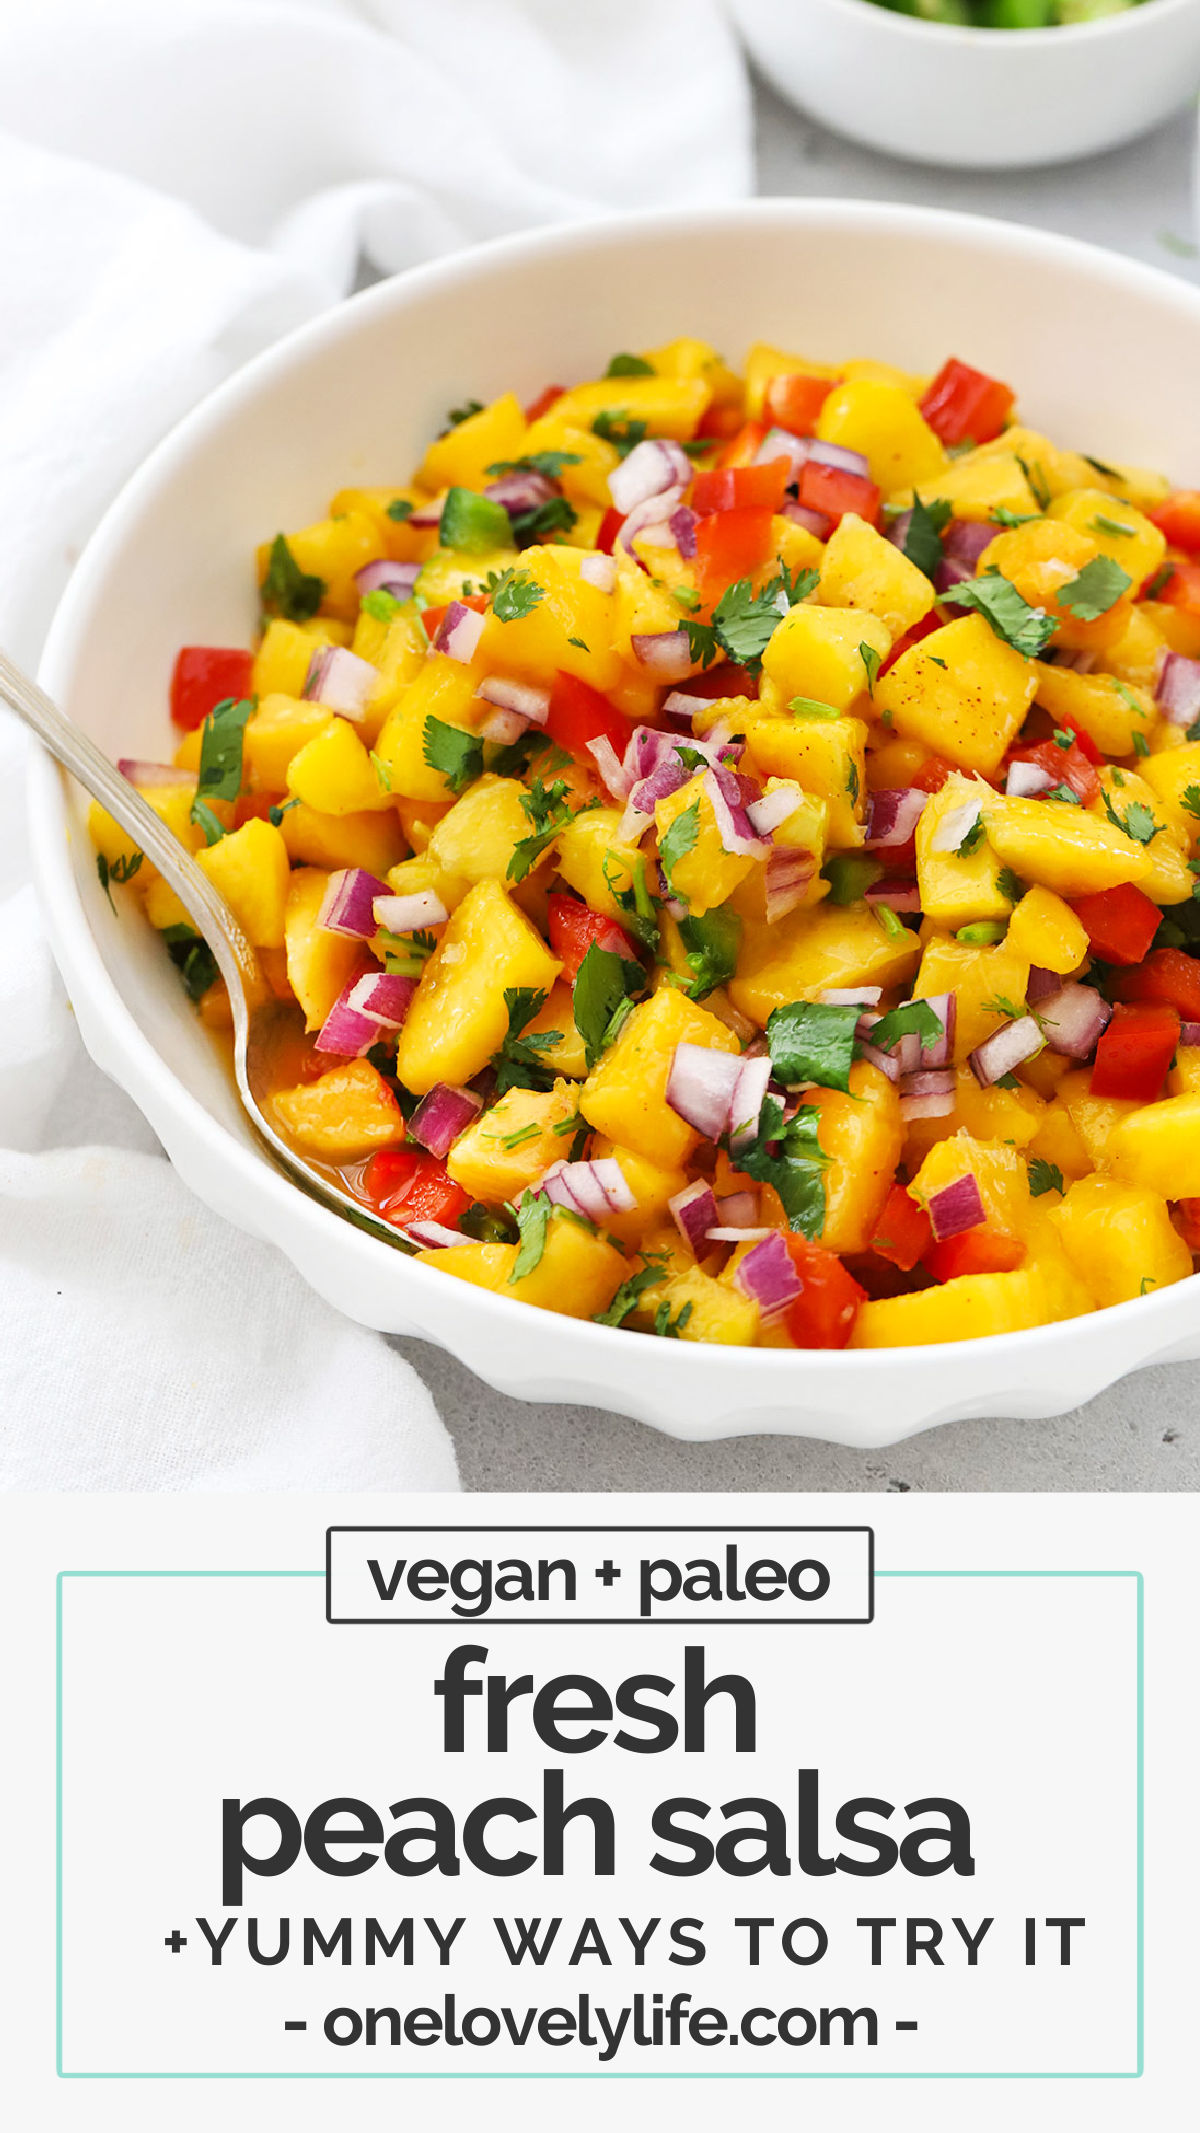 Easy Peach Salsa - This fresh peach salsa recipe is sweet, a little spicy, and fabulous with ALL the things. (Vegan, Paleo, Gluten-Free) // Fruit salsa // salsa with peaches // peach salsa without tomatoes // peach recipes // summer recipe // healthy salsa // homemade salsa // healthy appetizer // summer salsa recipe // tex mex recipes // taco night recipe // easy salsa recipes